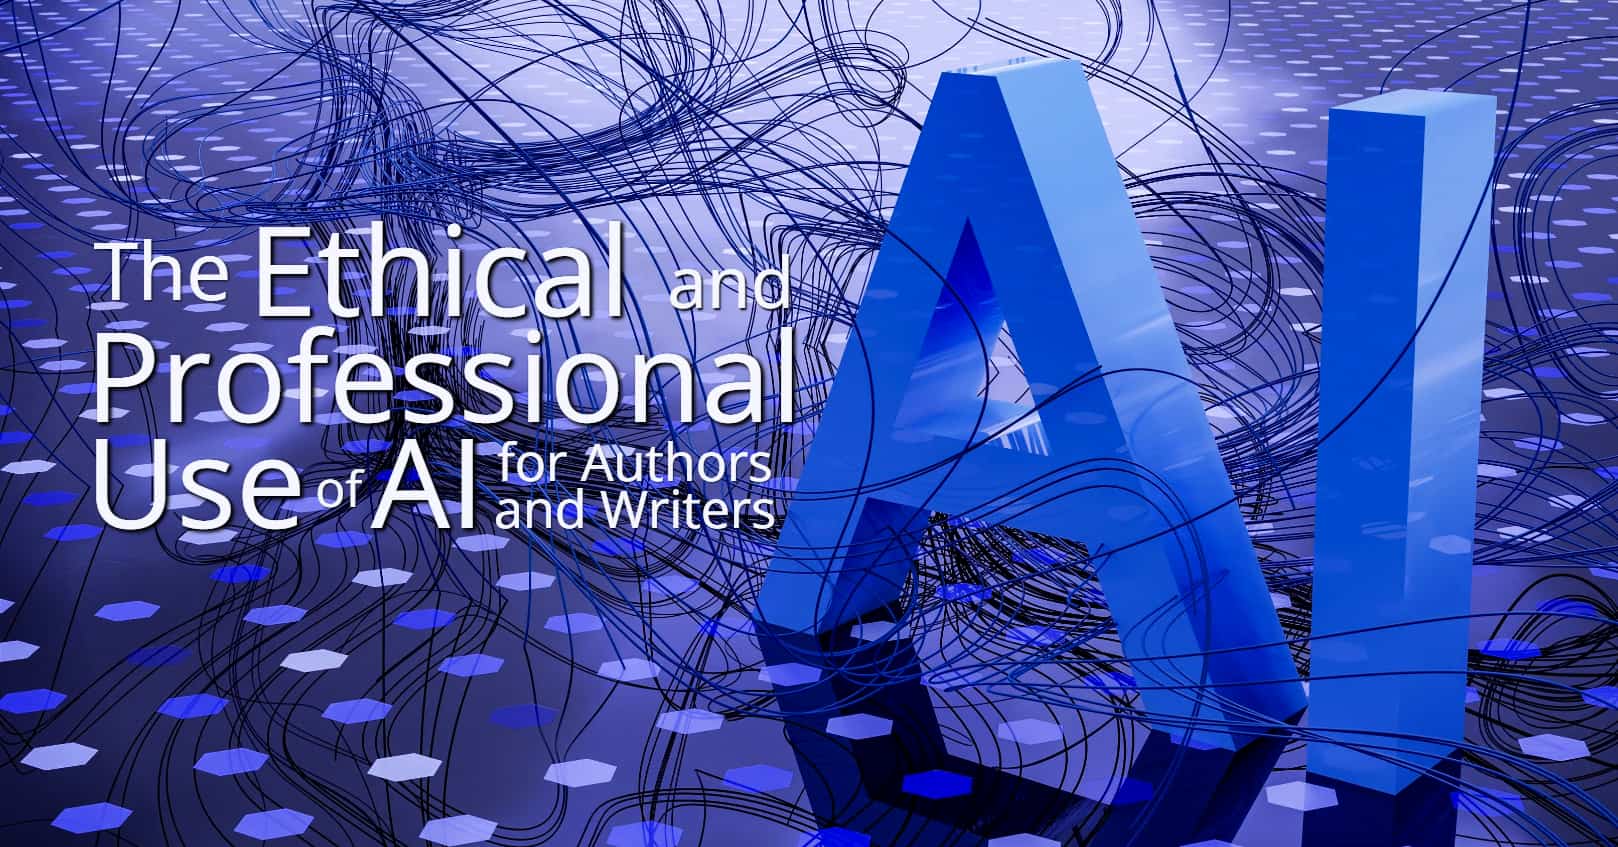 The Ethical Use of AI for Authors